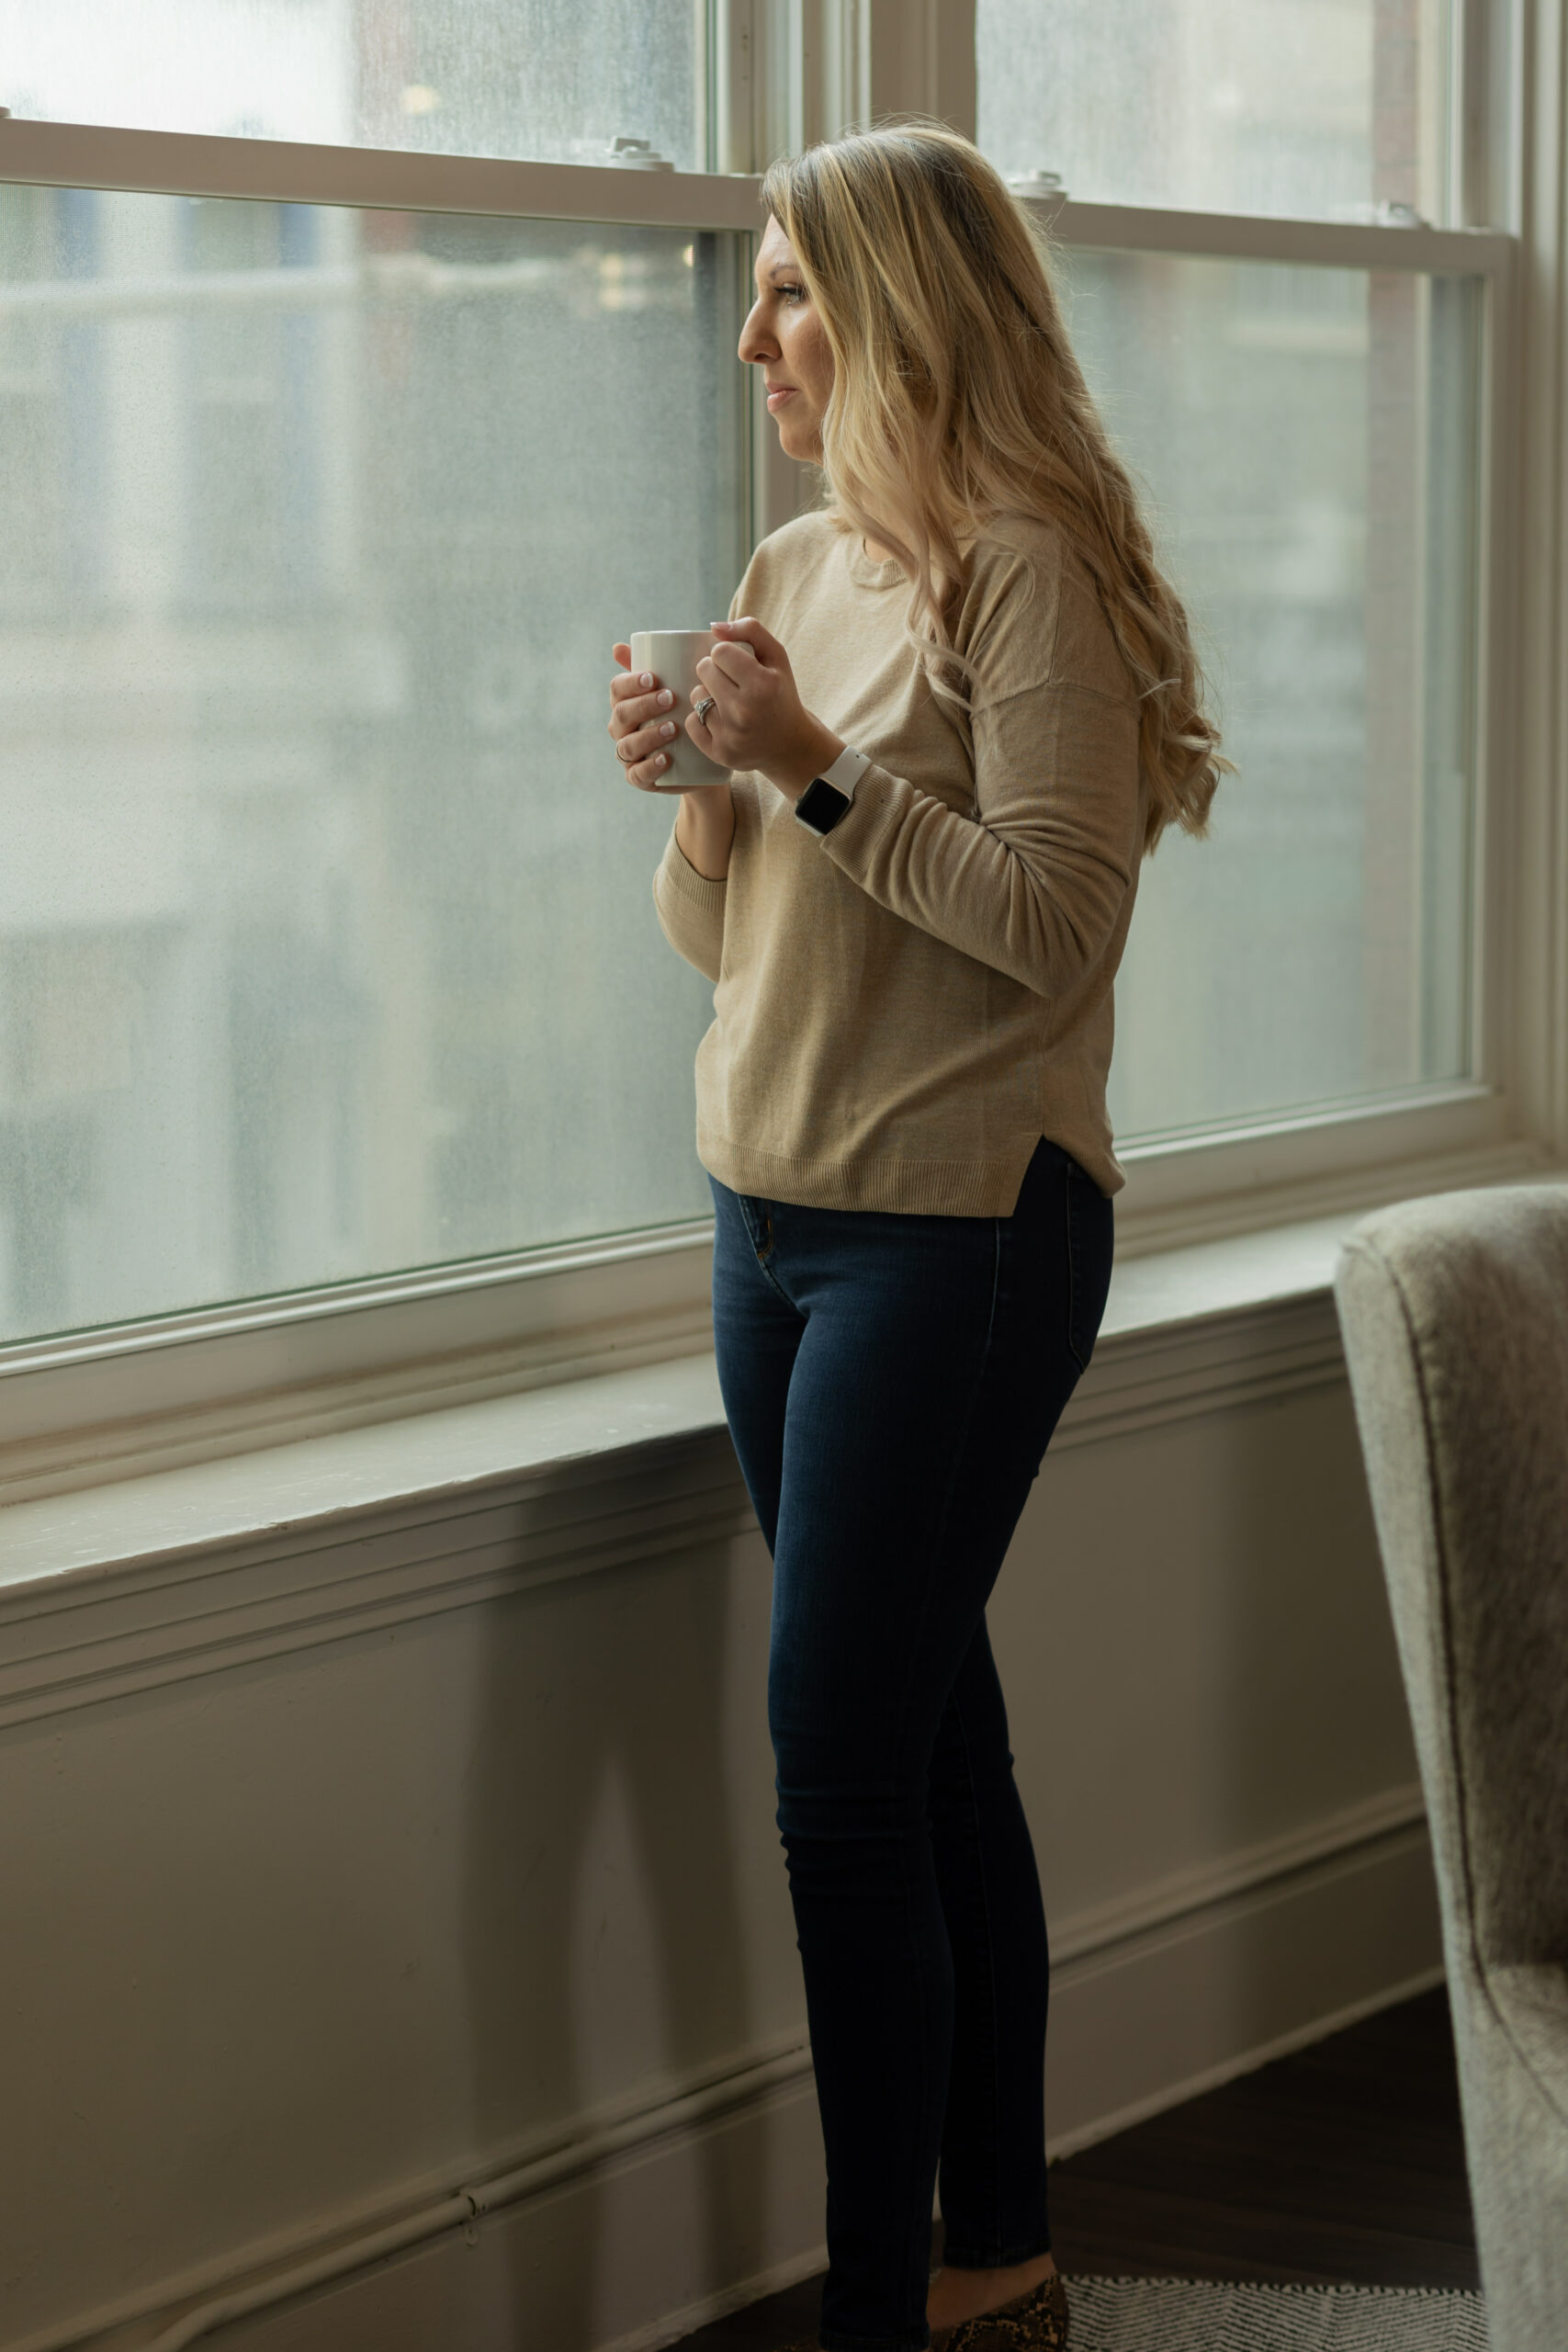 Desirae Allen, DBT psychologist, looks out the window on a dreary day while holding a coffee cup, preparing for a DBT session with a client diagnosed with borderline personality disorder (BPD).